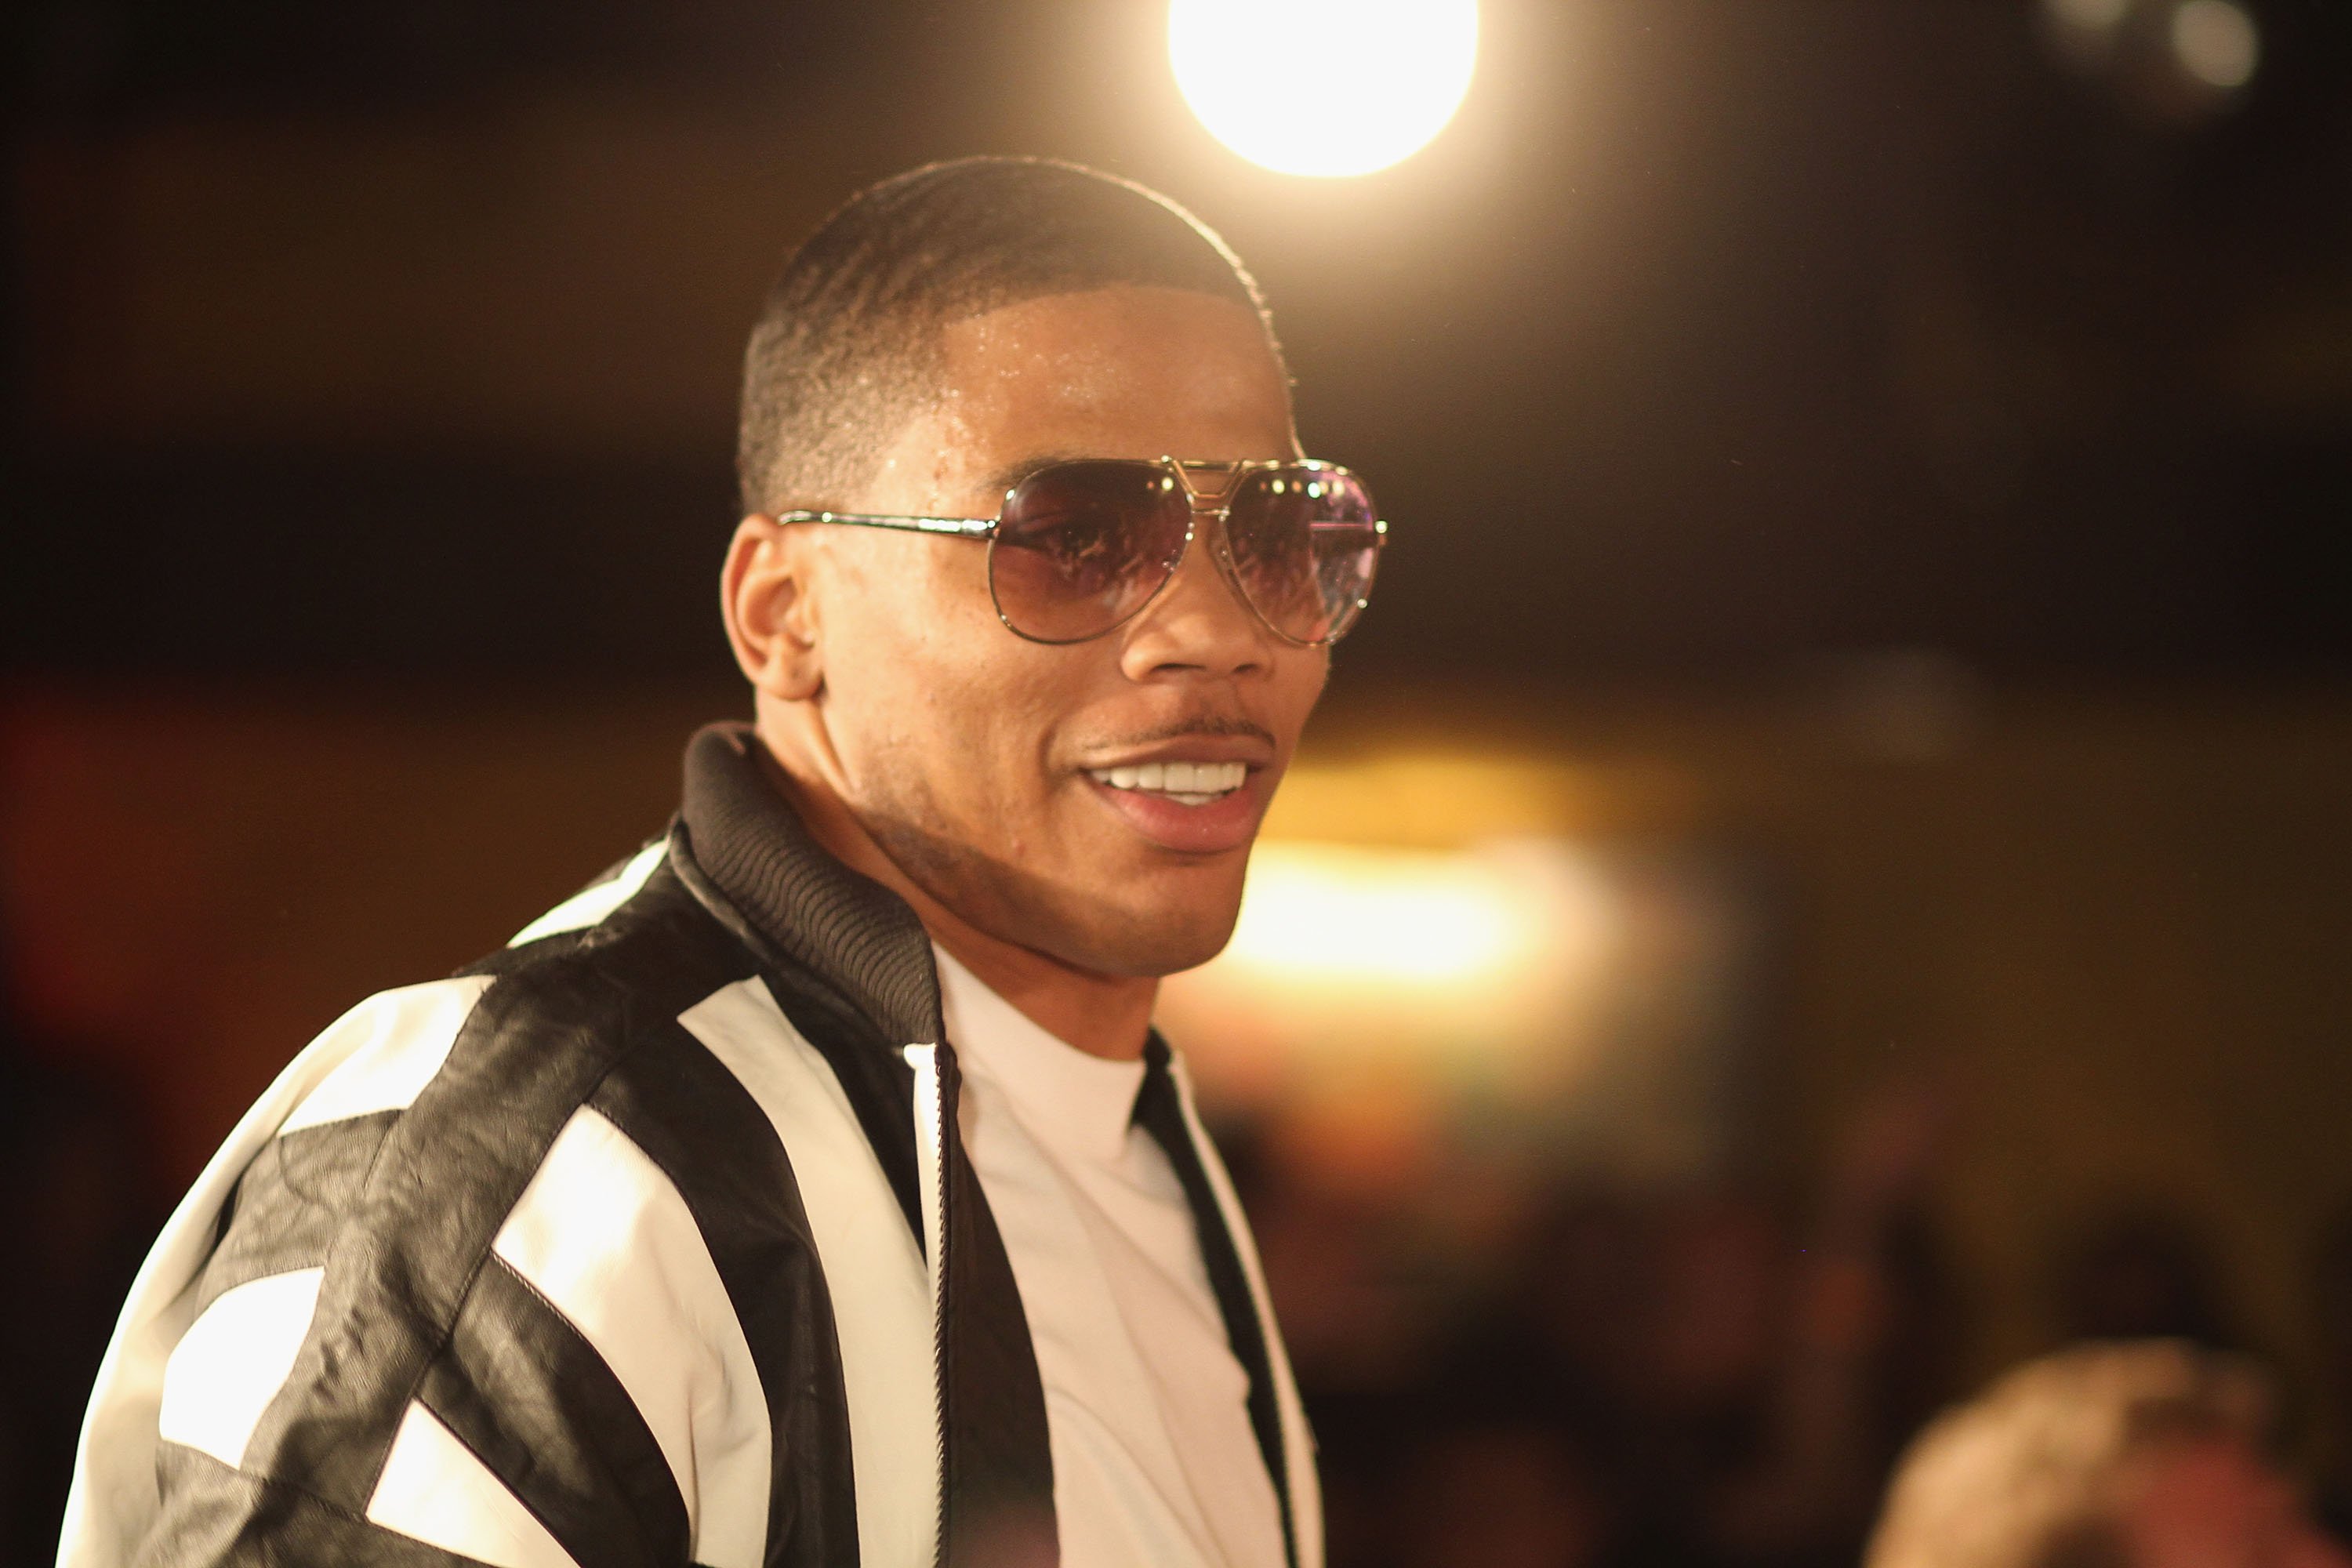 Nelly performing at the VEVO GO show at Blueberry Hill on October 15, 2010 in St. Louis, Missouri. | Source: Getty Images